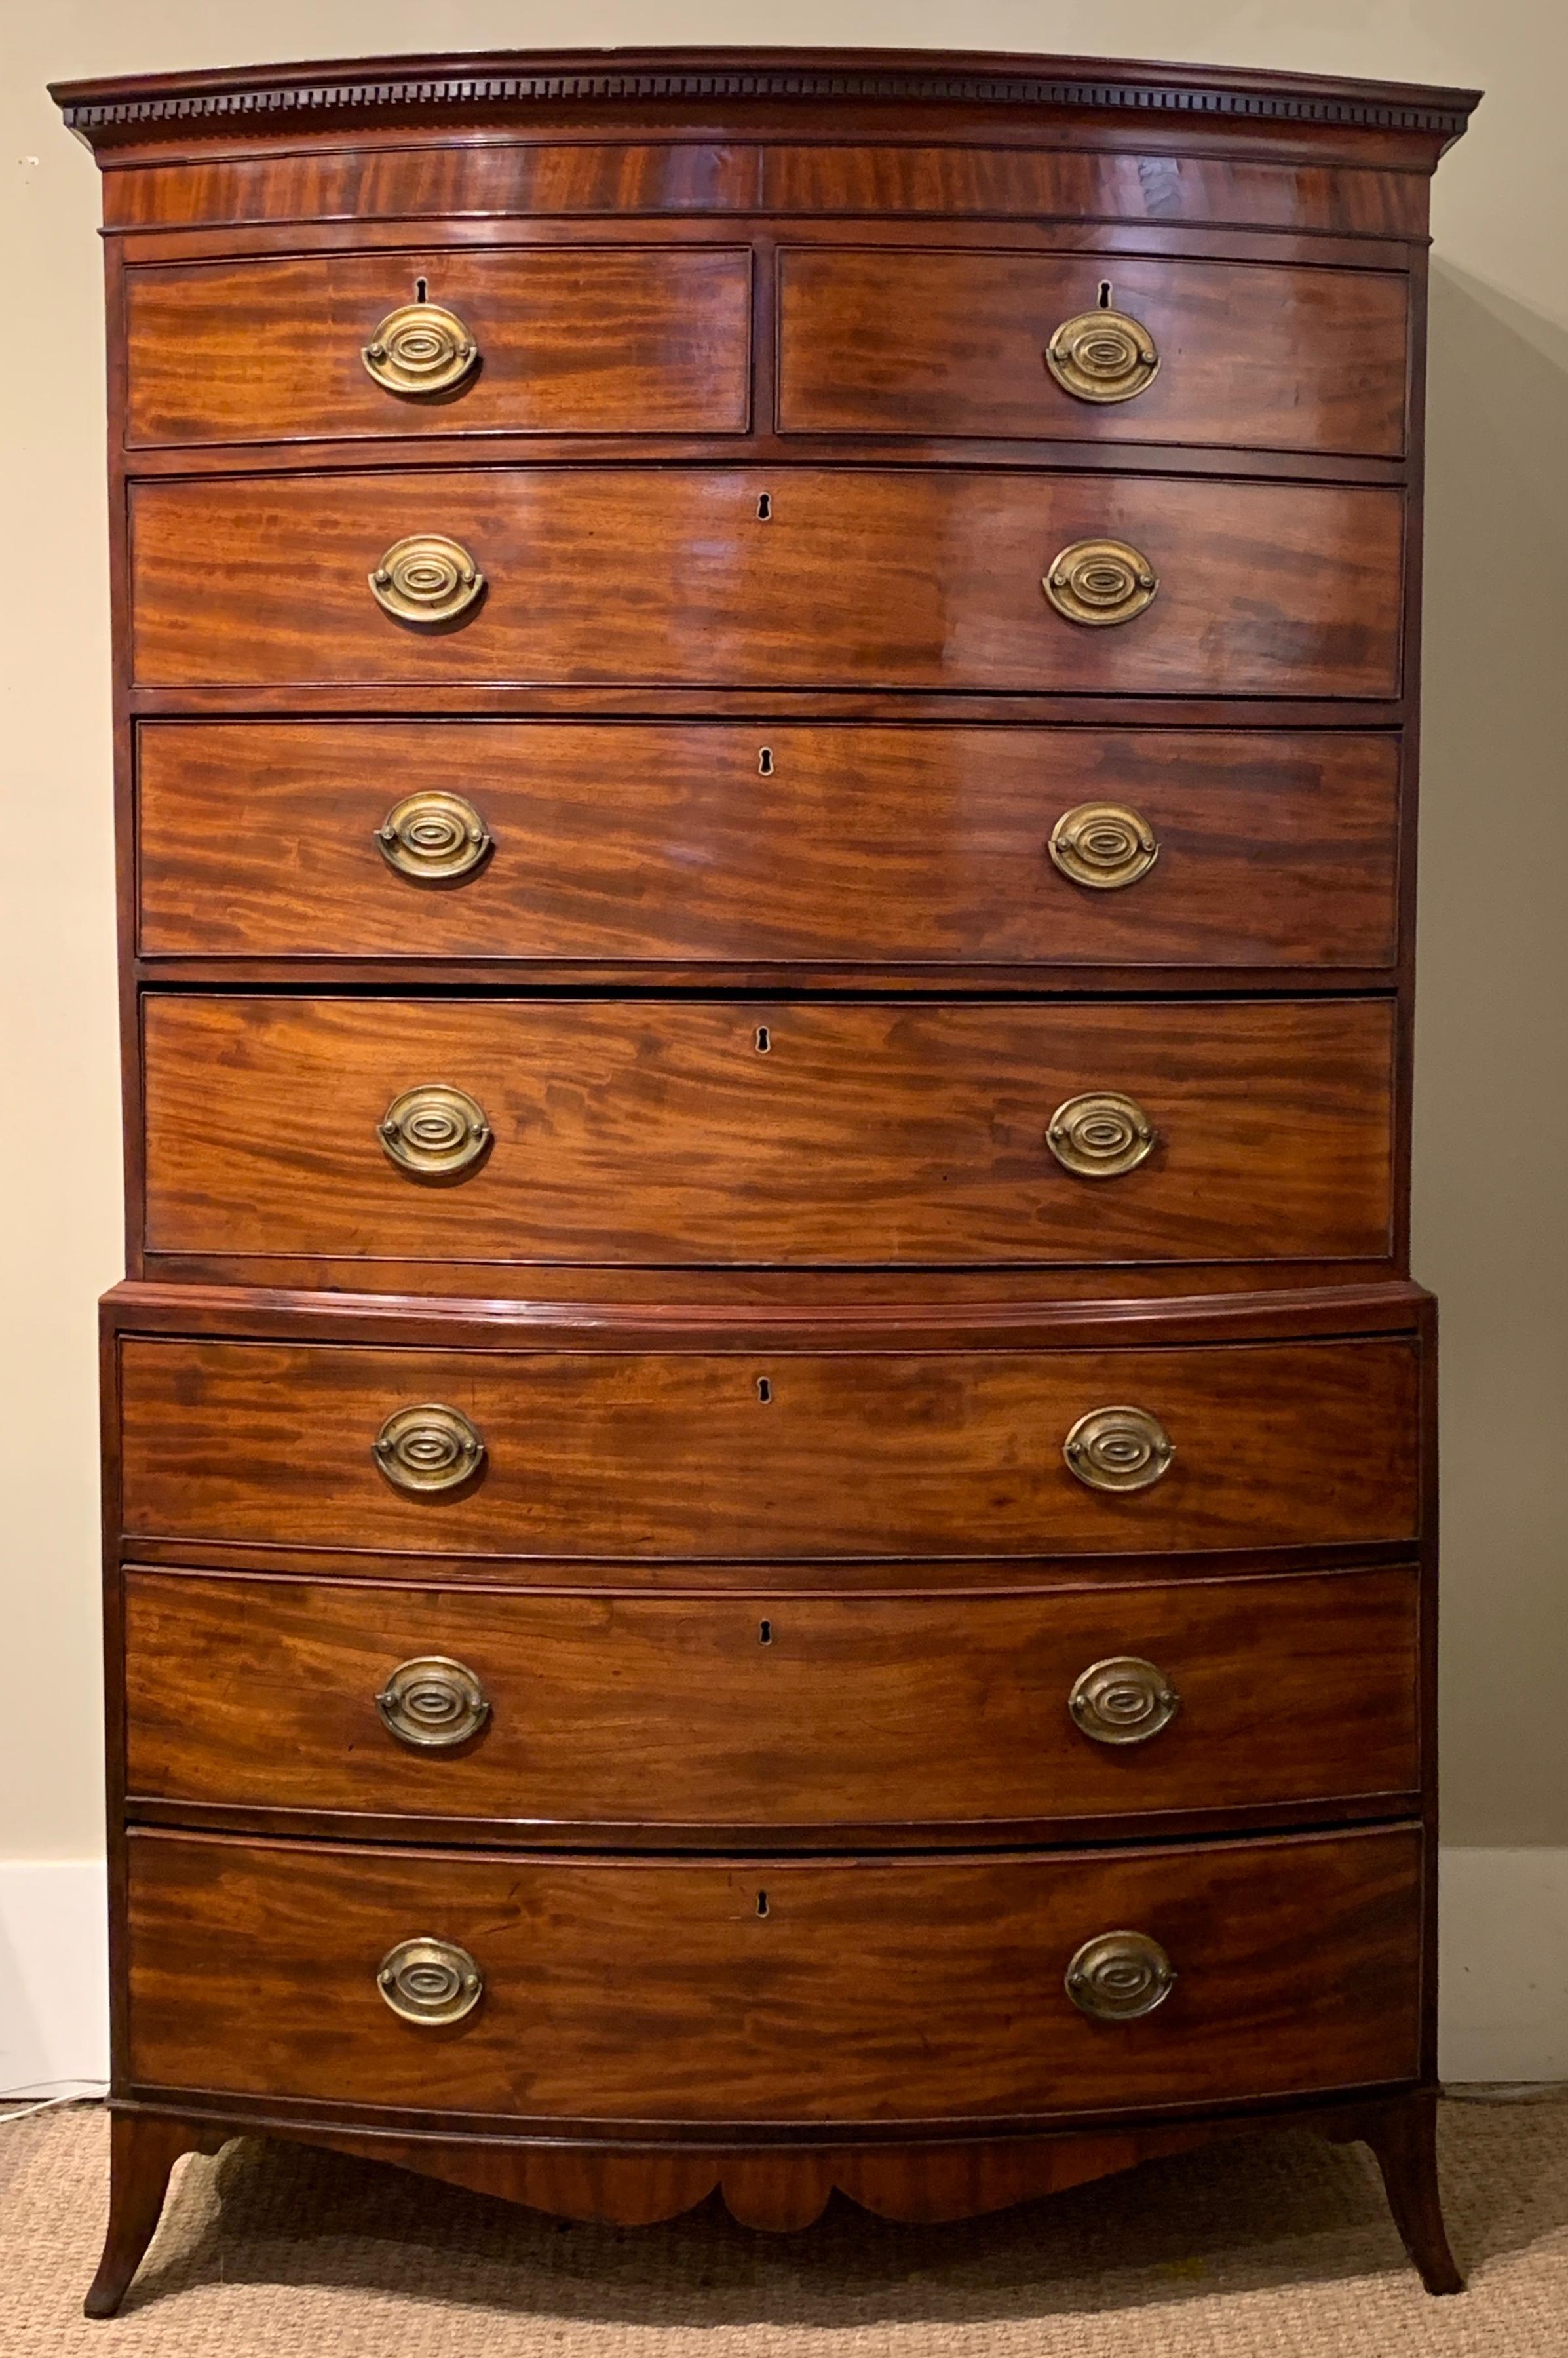 An elegant late 18th century English mahogany bowfront chest on chest. The top portion contains two small drawers over three graduated large drawers and the bottom portion contains three graduated large drawers. The piece is topped with a crown